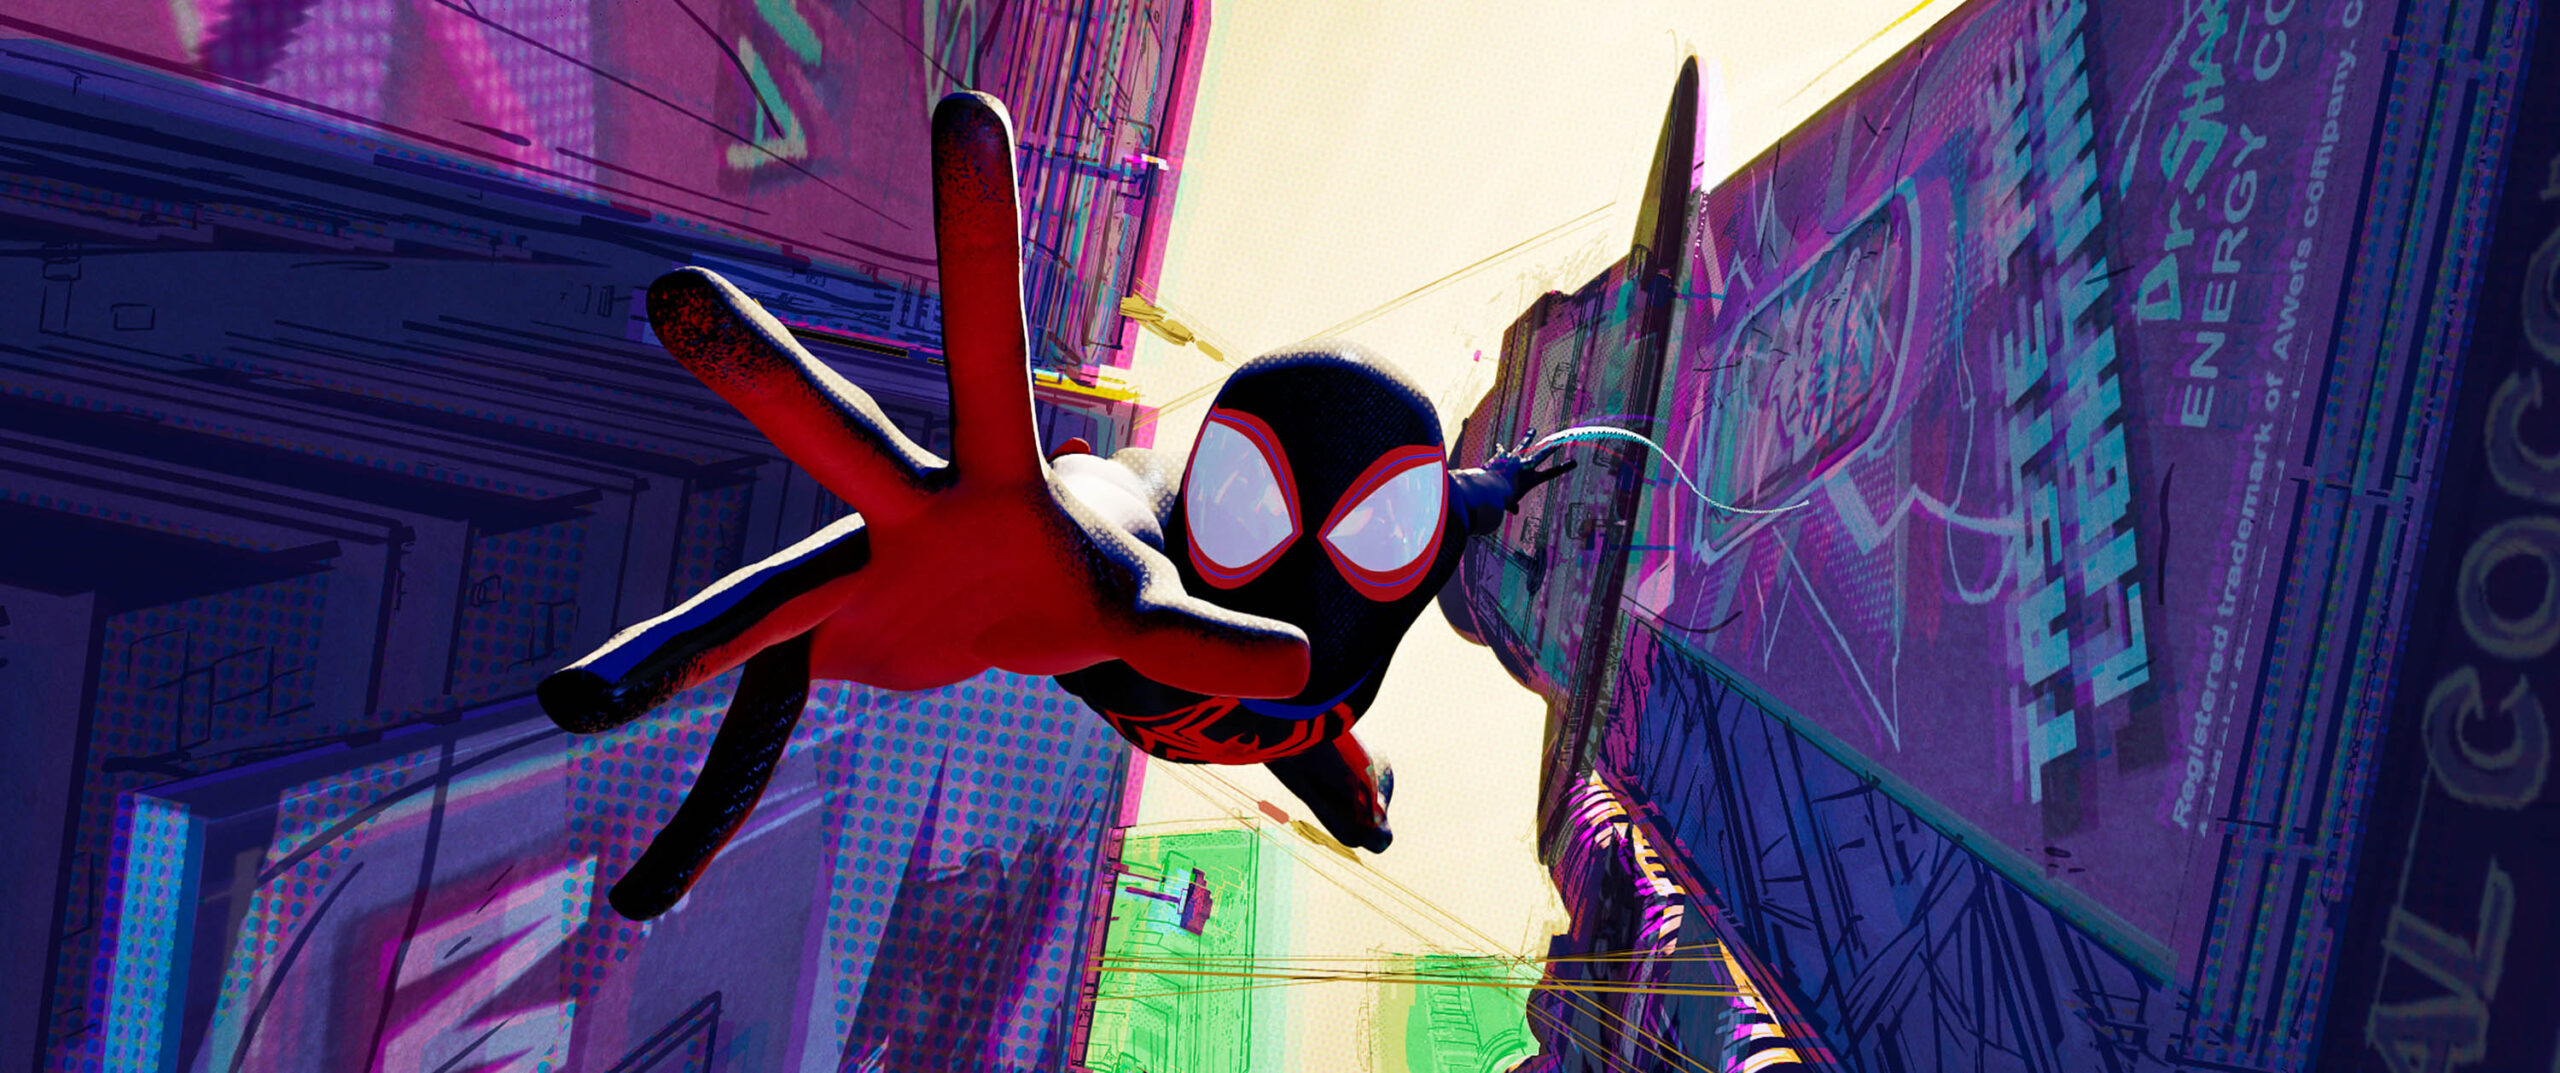 Spider-Man/Miles Morales (Shameik Moore) in Spider-Man: Across the Spider-Verse di Columbia Pictures e Sony Pictures Animation [credit: Sony Pictures Animation; Copyright 2023 CTMG, Inc. All Rights Reserved]